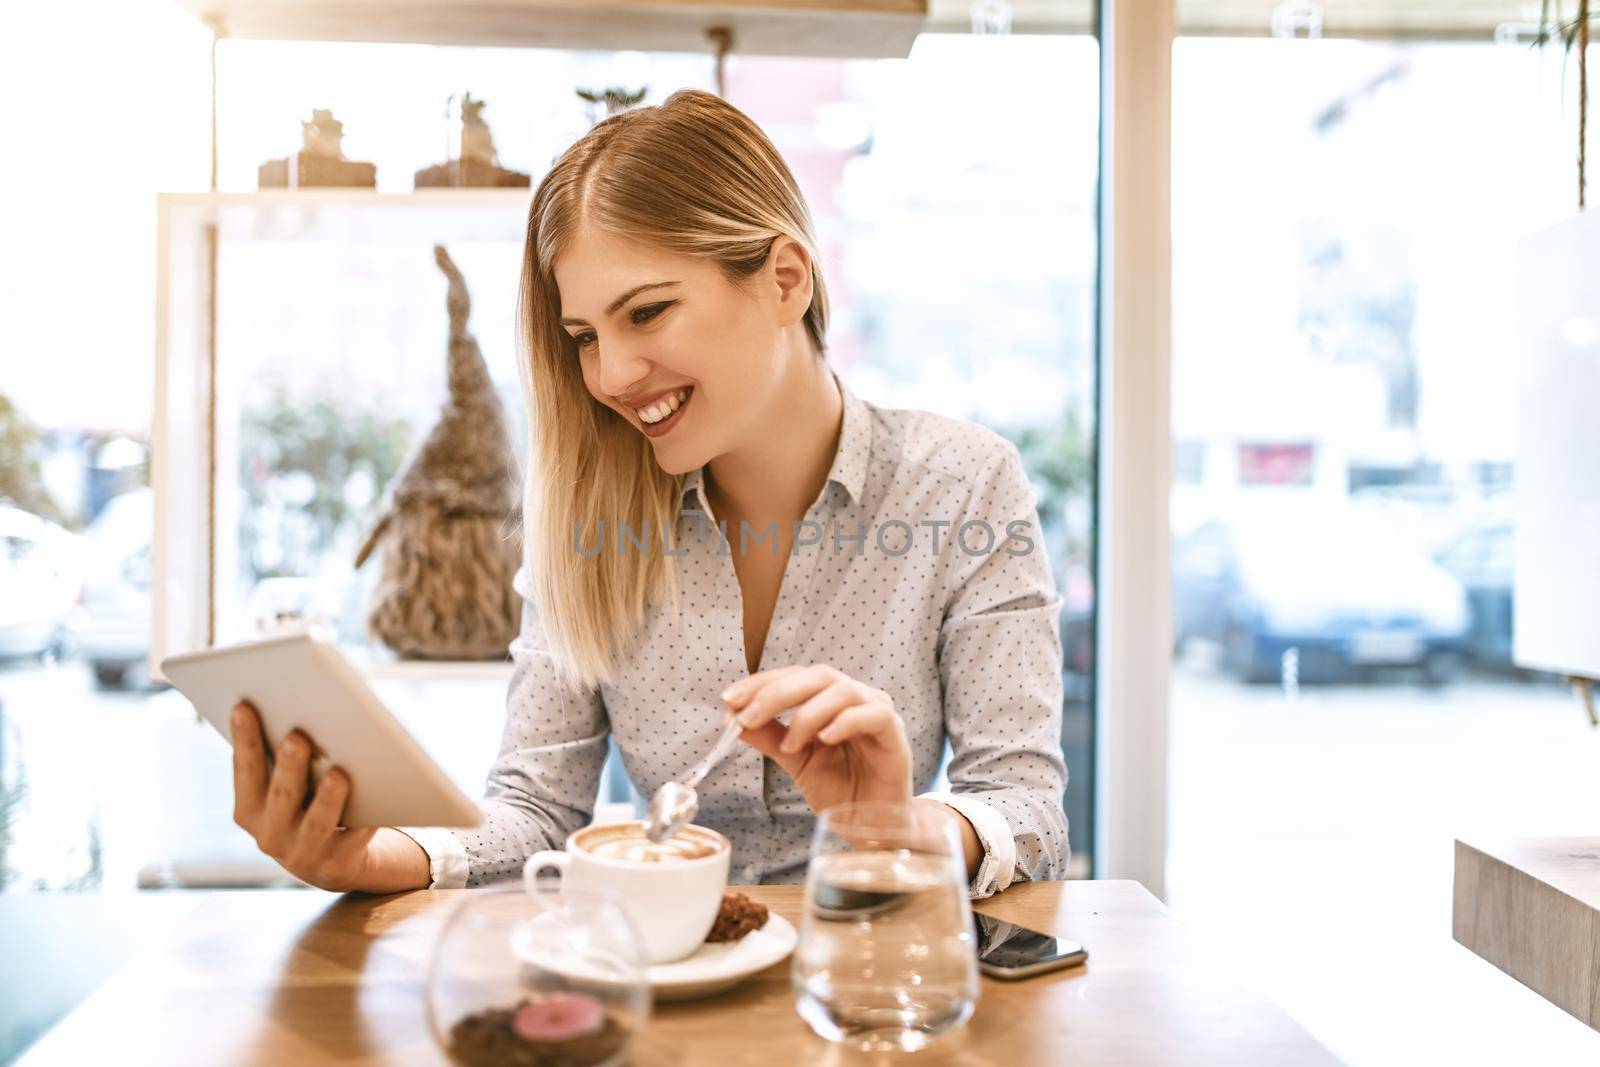 Beautiful young smiling woman drinking coffee in a cafe. She is surfing the internet on a digital tablet.